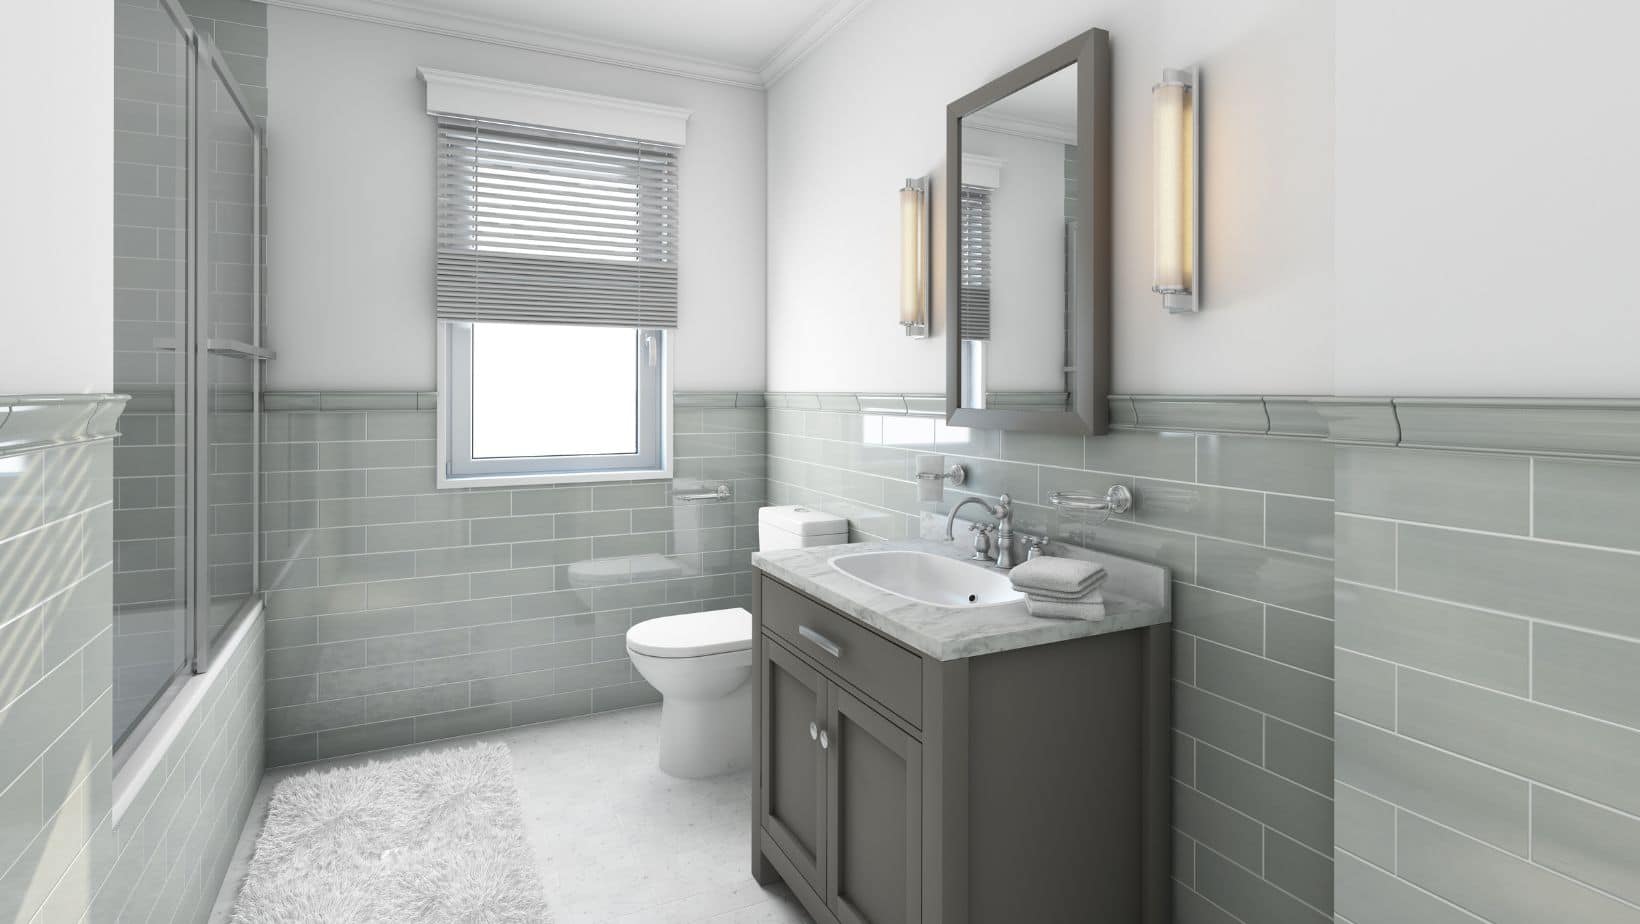 Small toilet and shower with dark grey bathroom cabinet with white countertop